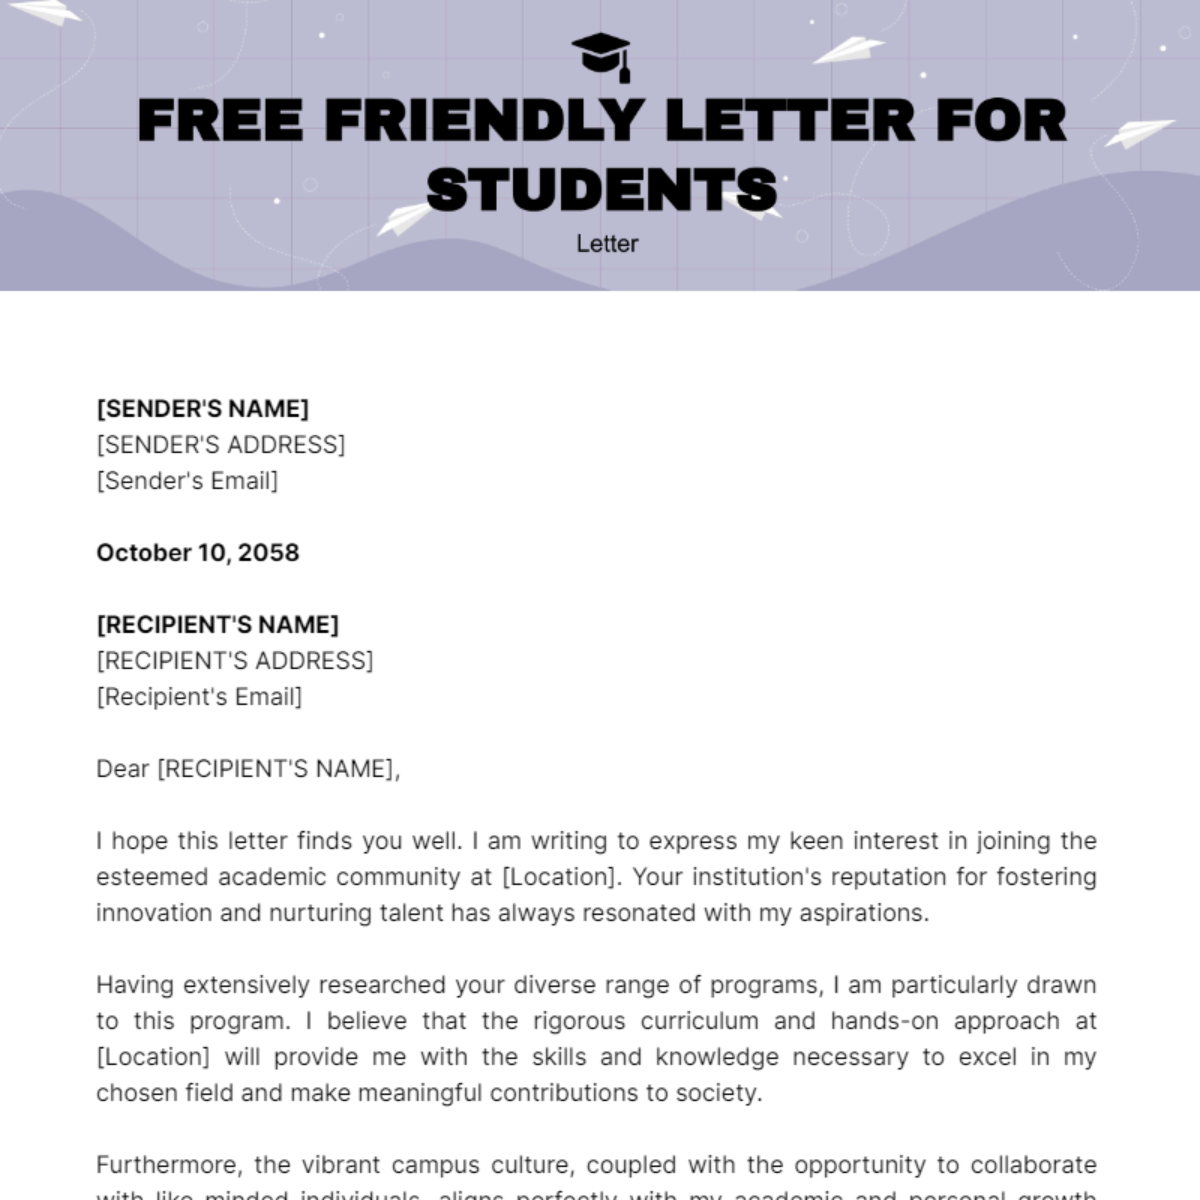 Friendly Letter for Students Template